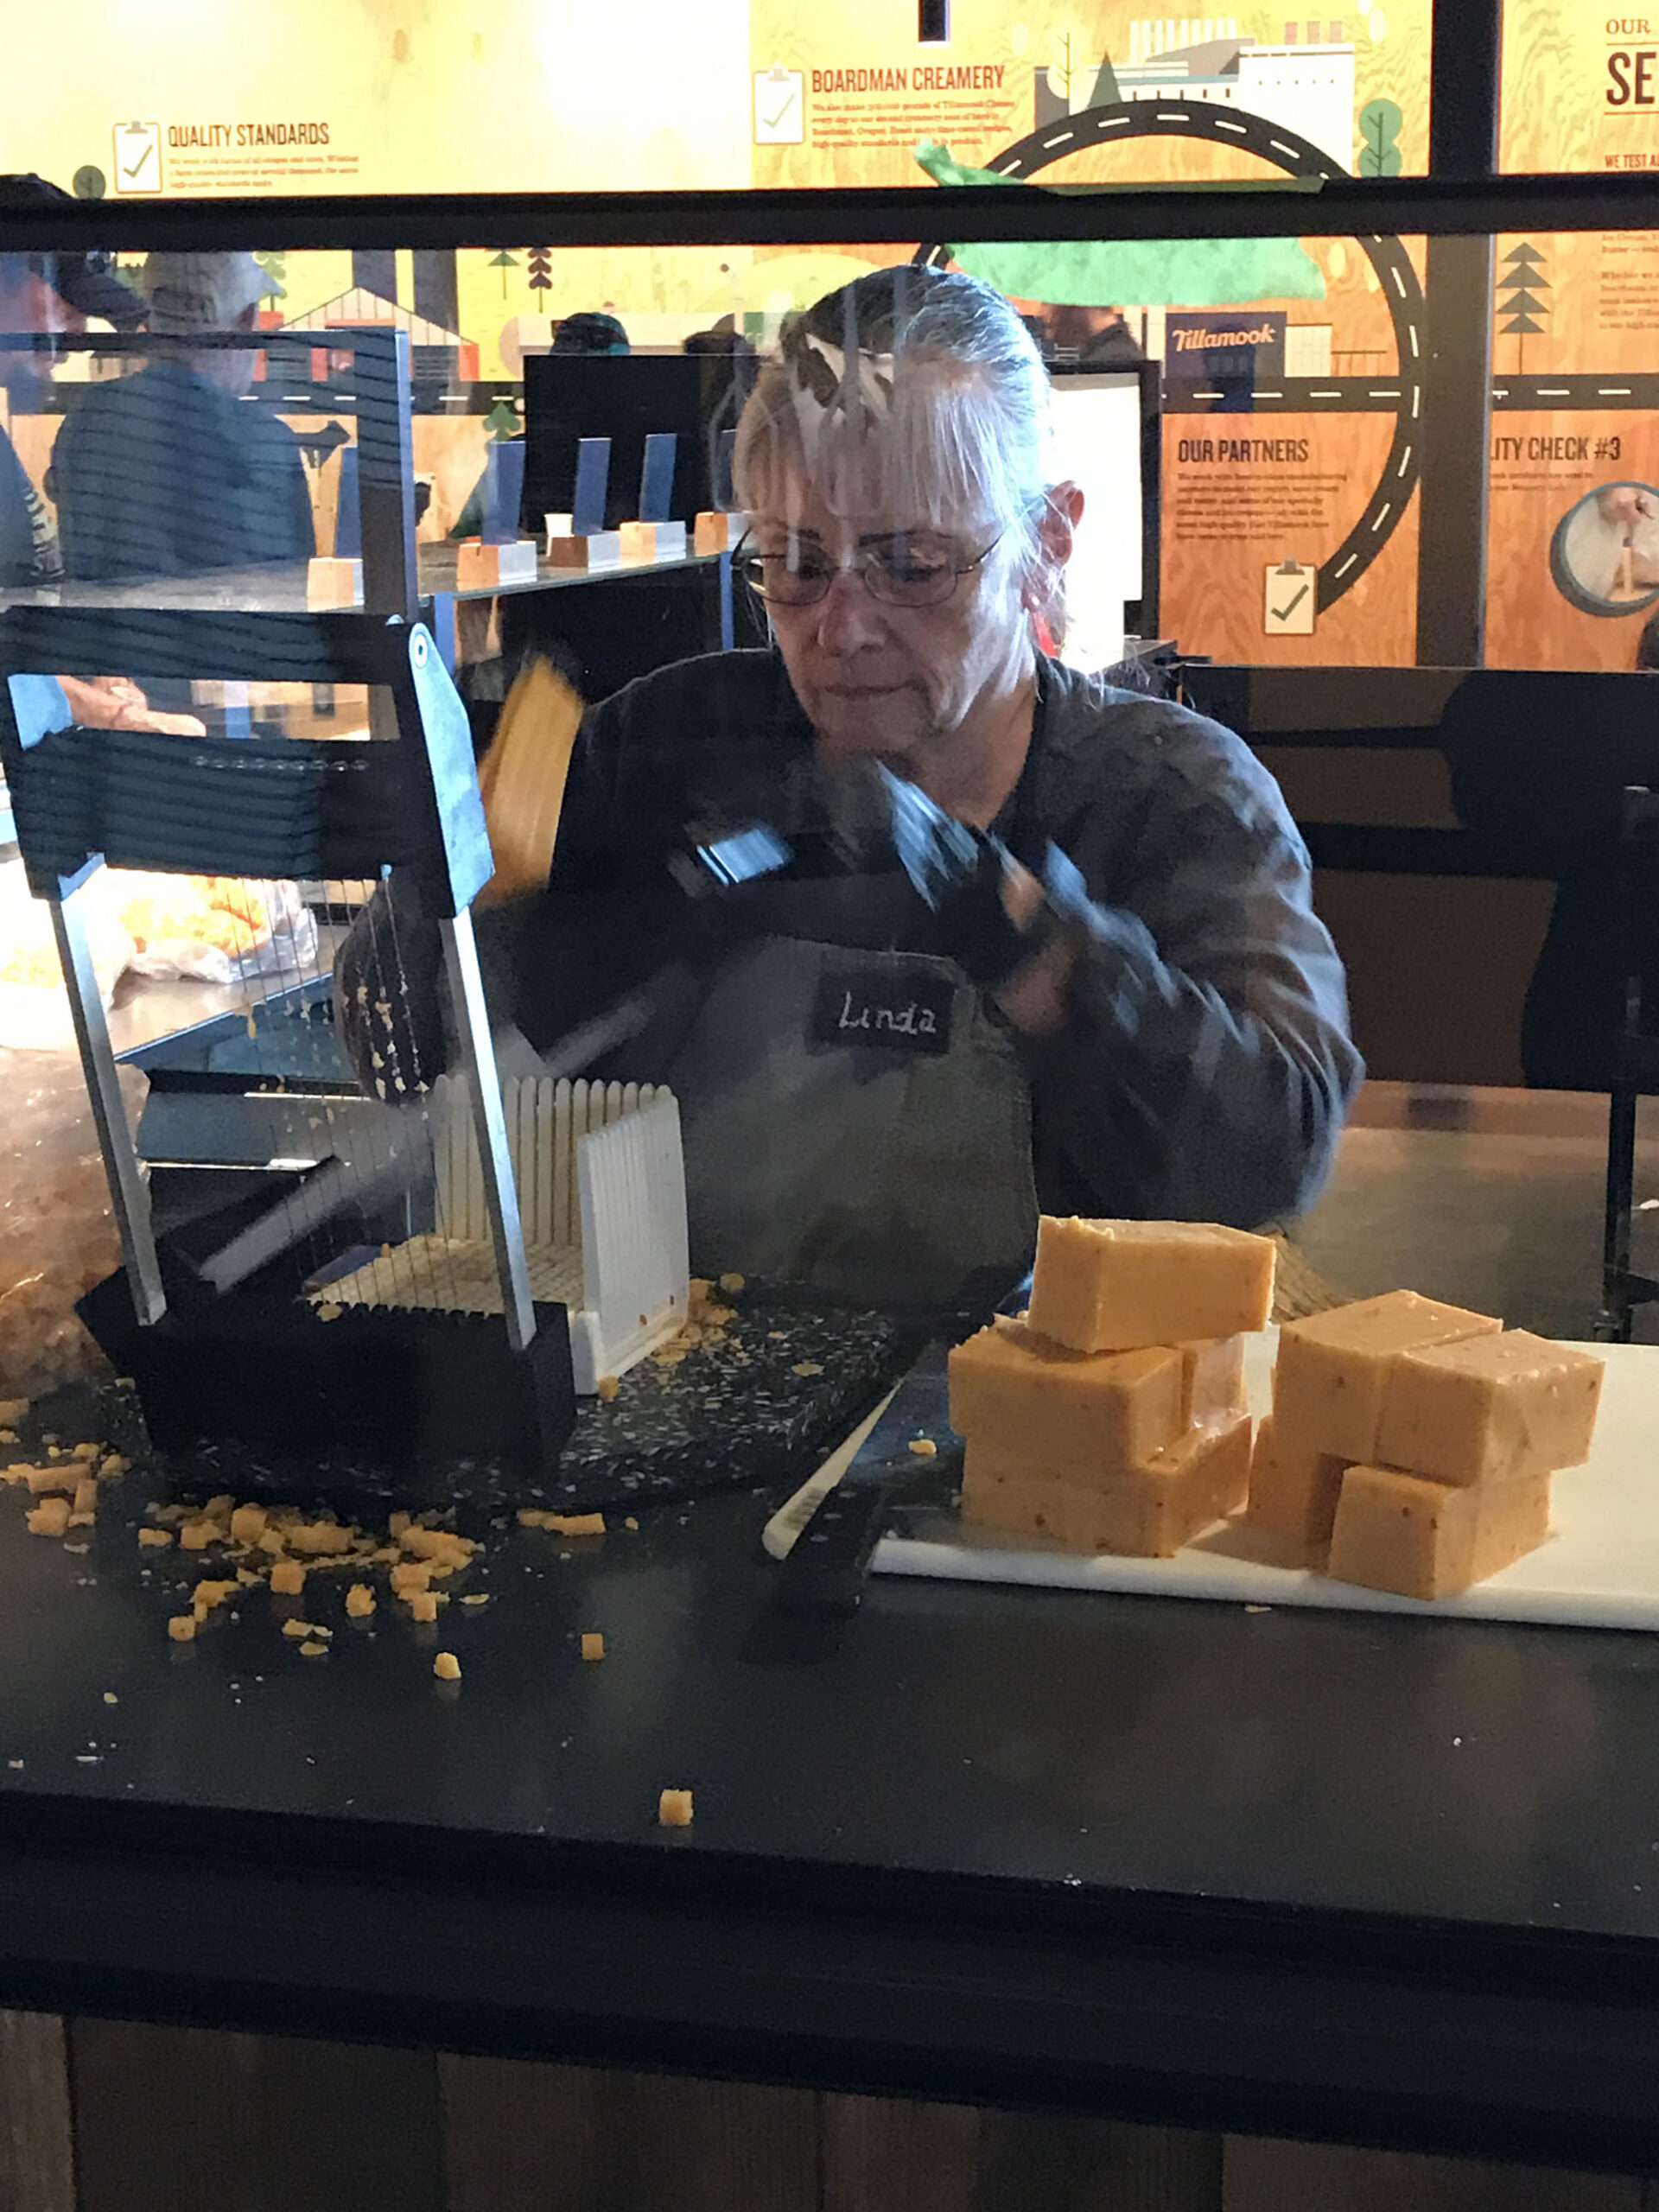 One of many station where you can taste the Tillamook cheese.